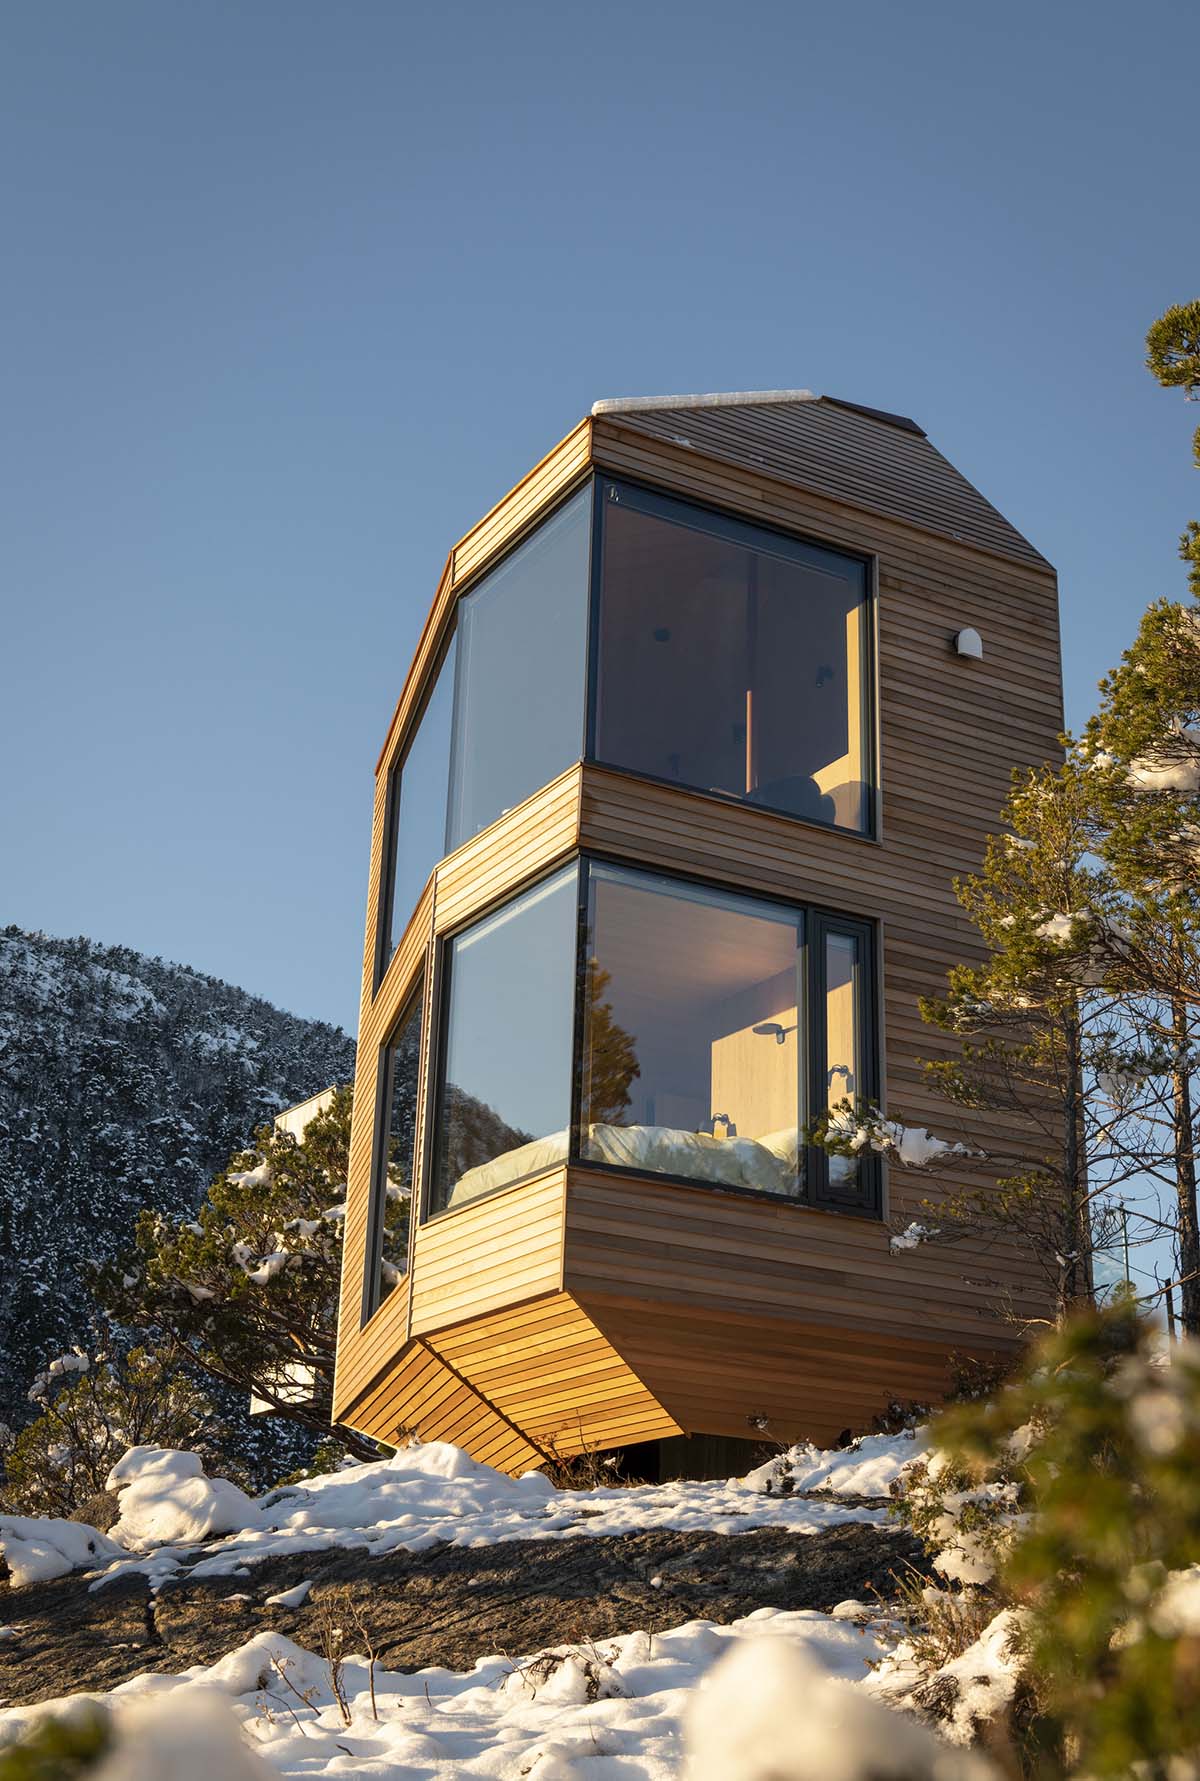 Snøhetta and Vipp built nest-like cabins giving 